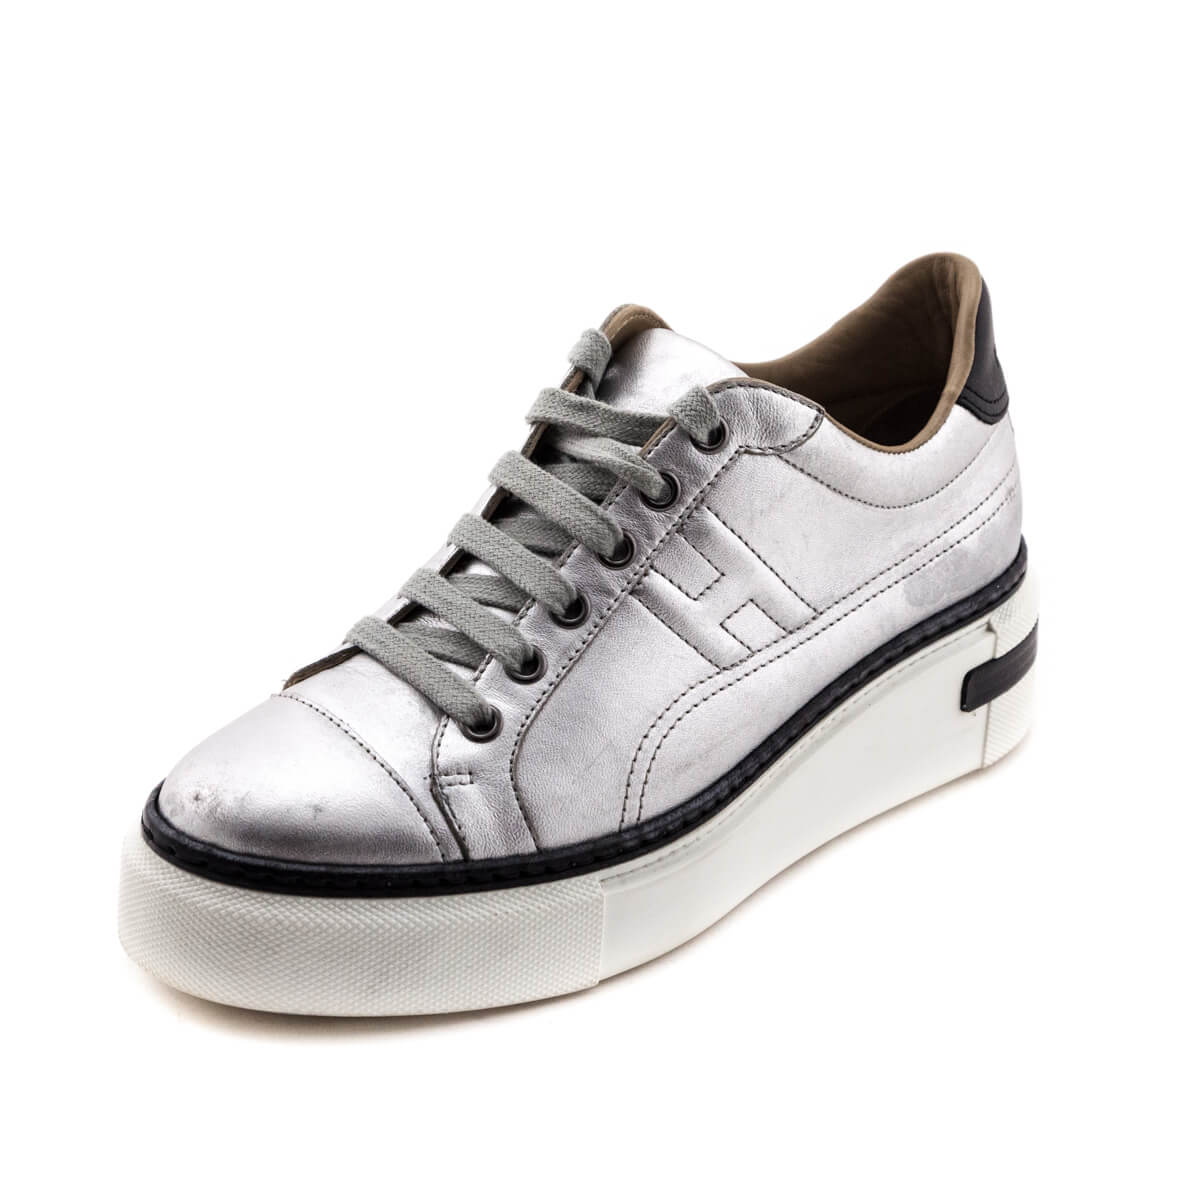 Hermes Silver Polo Platform Sneakers Size US 6 | EU 36 - Love that Bag etc - Preowned Authentic Designer Handbags & Preloved Fashions